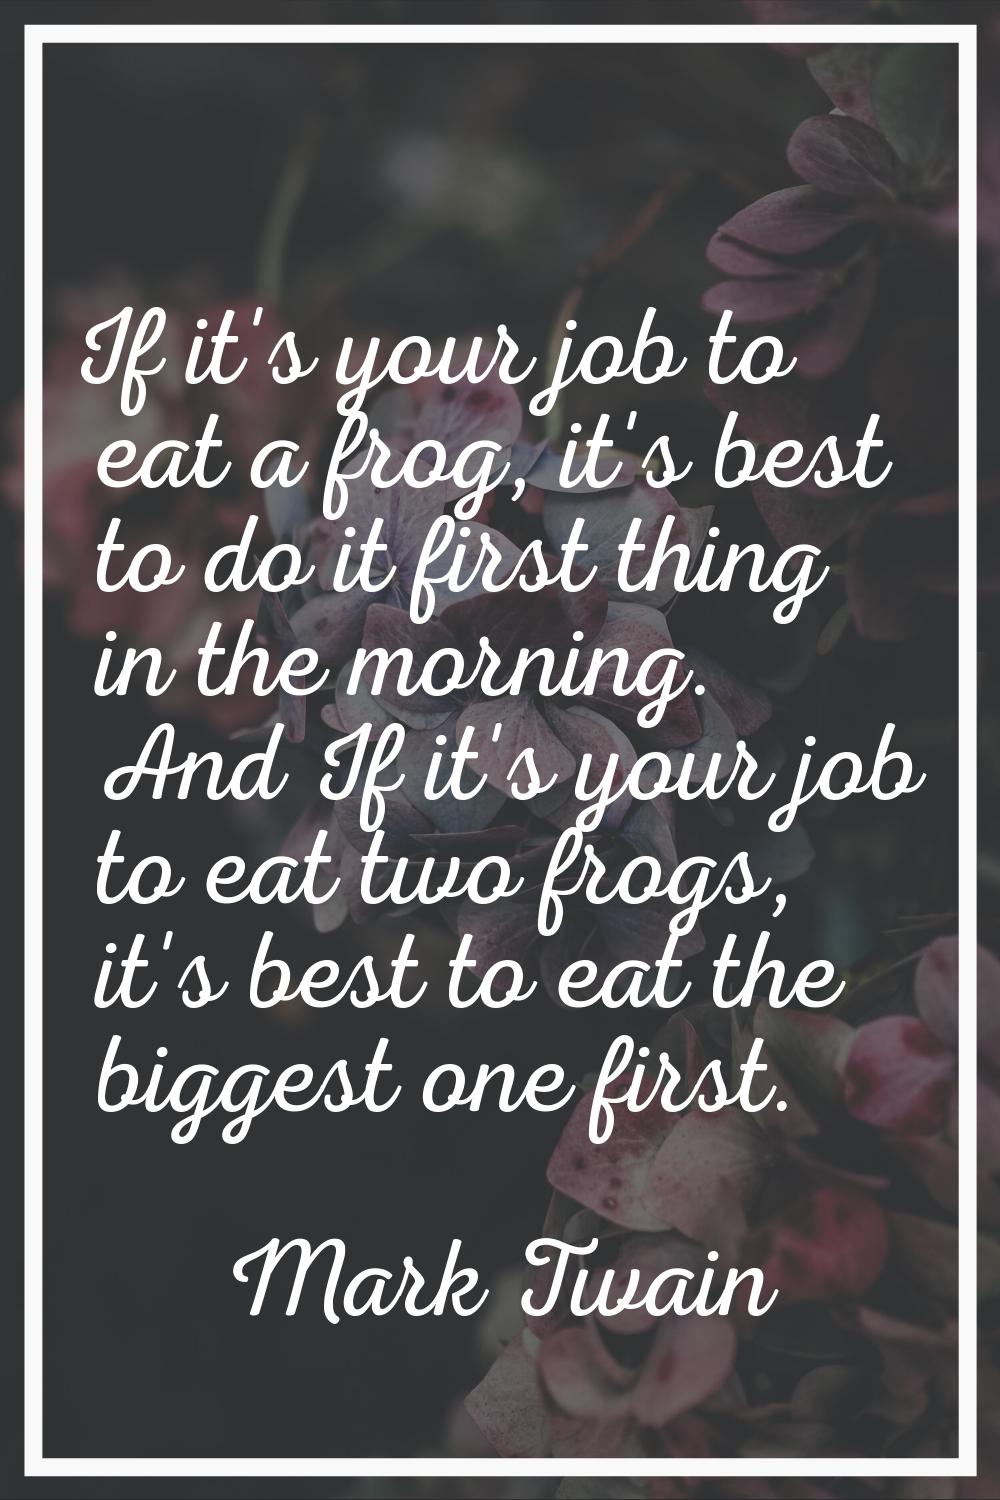 If it's your job to eat a frog, it's best to do it first thing in the morning. And If it's your job